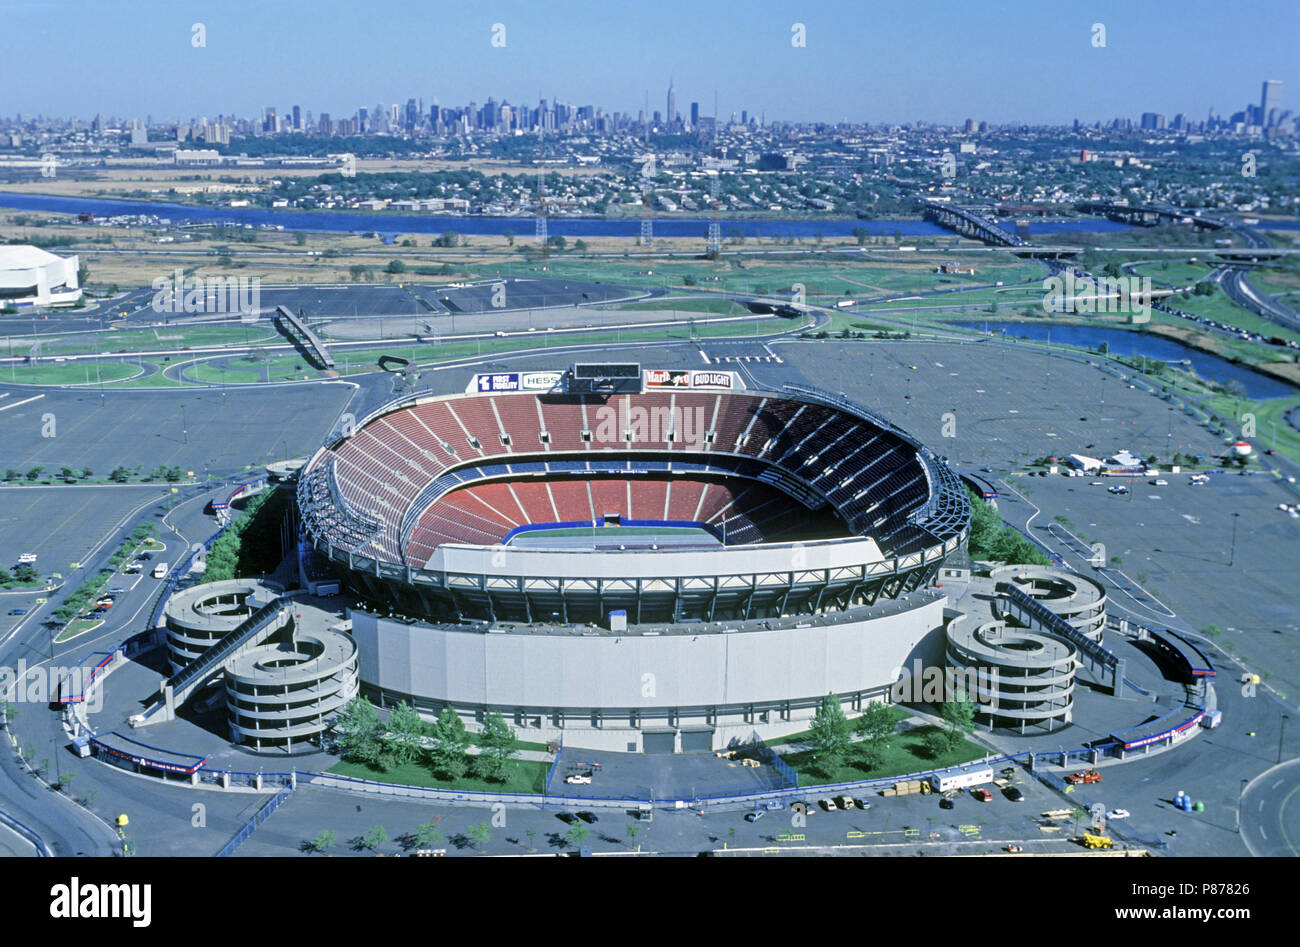 1990 HISTORICAL GIANT'S STADIUM (©KIVITT & MYERS 1976) MEADOWLANDS SPORTS  COMPLEX EAST RUTHERFORD NEW JERSEY USA Stock Photo - Alamy